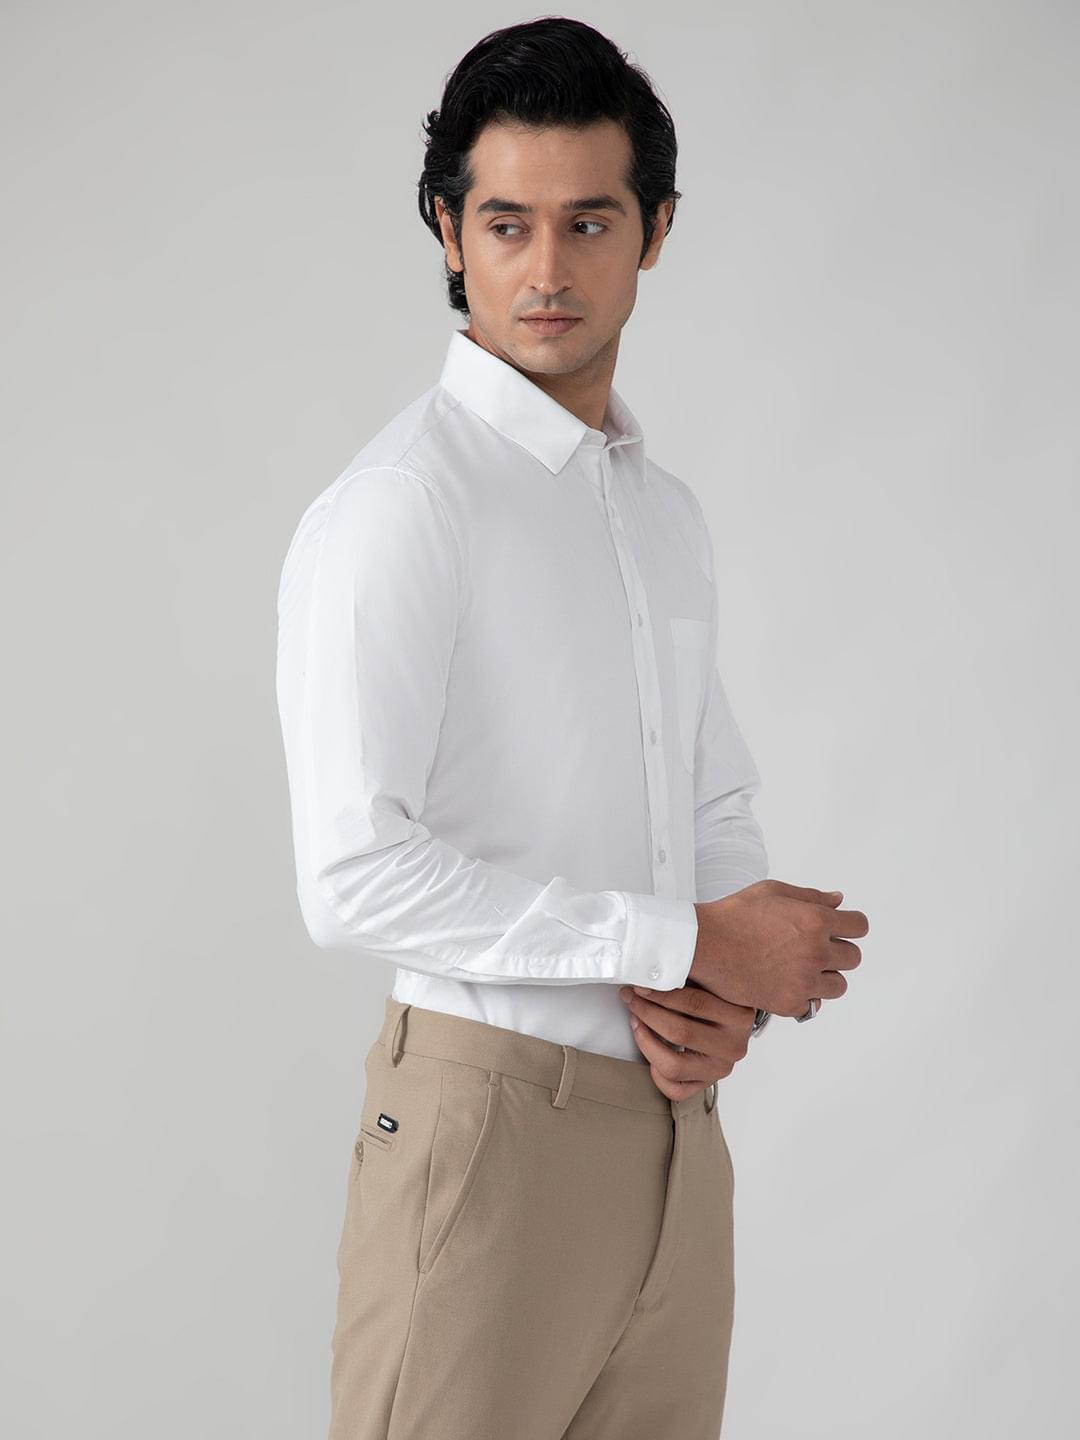 Evening Shirt in White with Stretch - Slim Fit